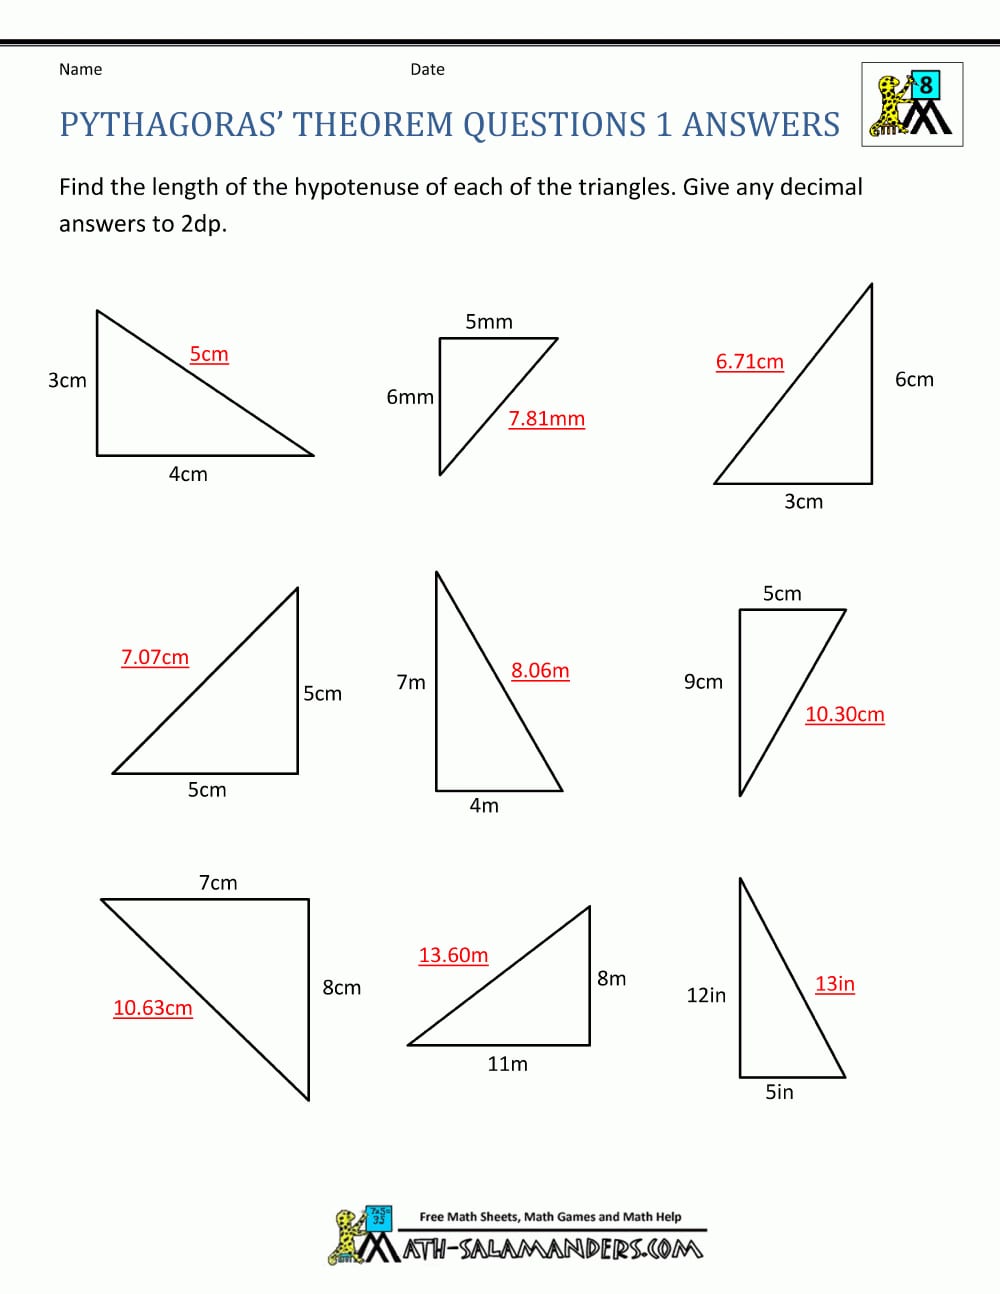 Pythagoras Theorem Questions For The Pythagorean Theorem Worksheet Answers